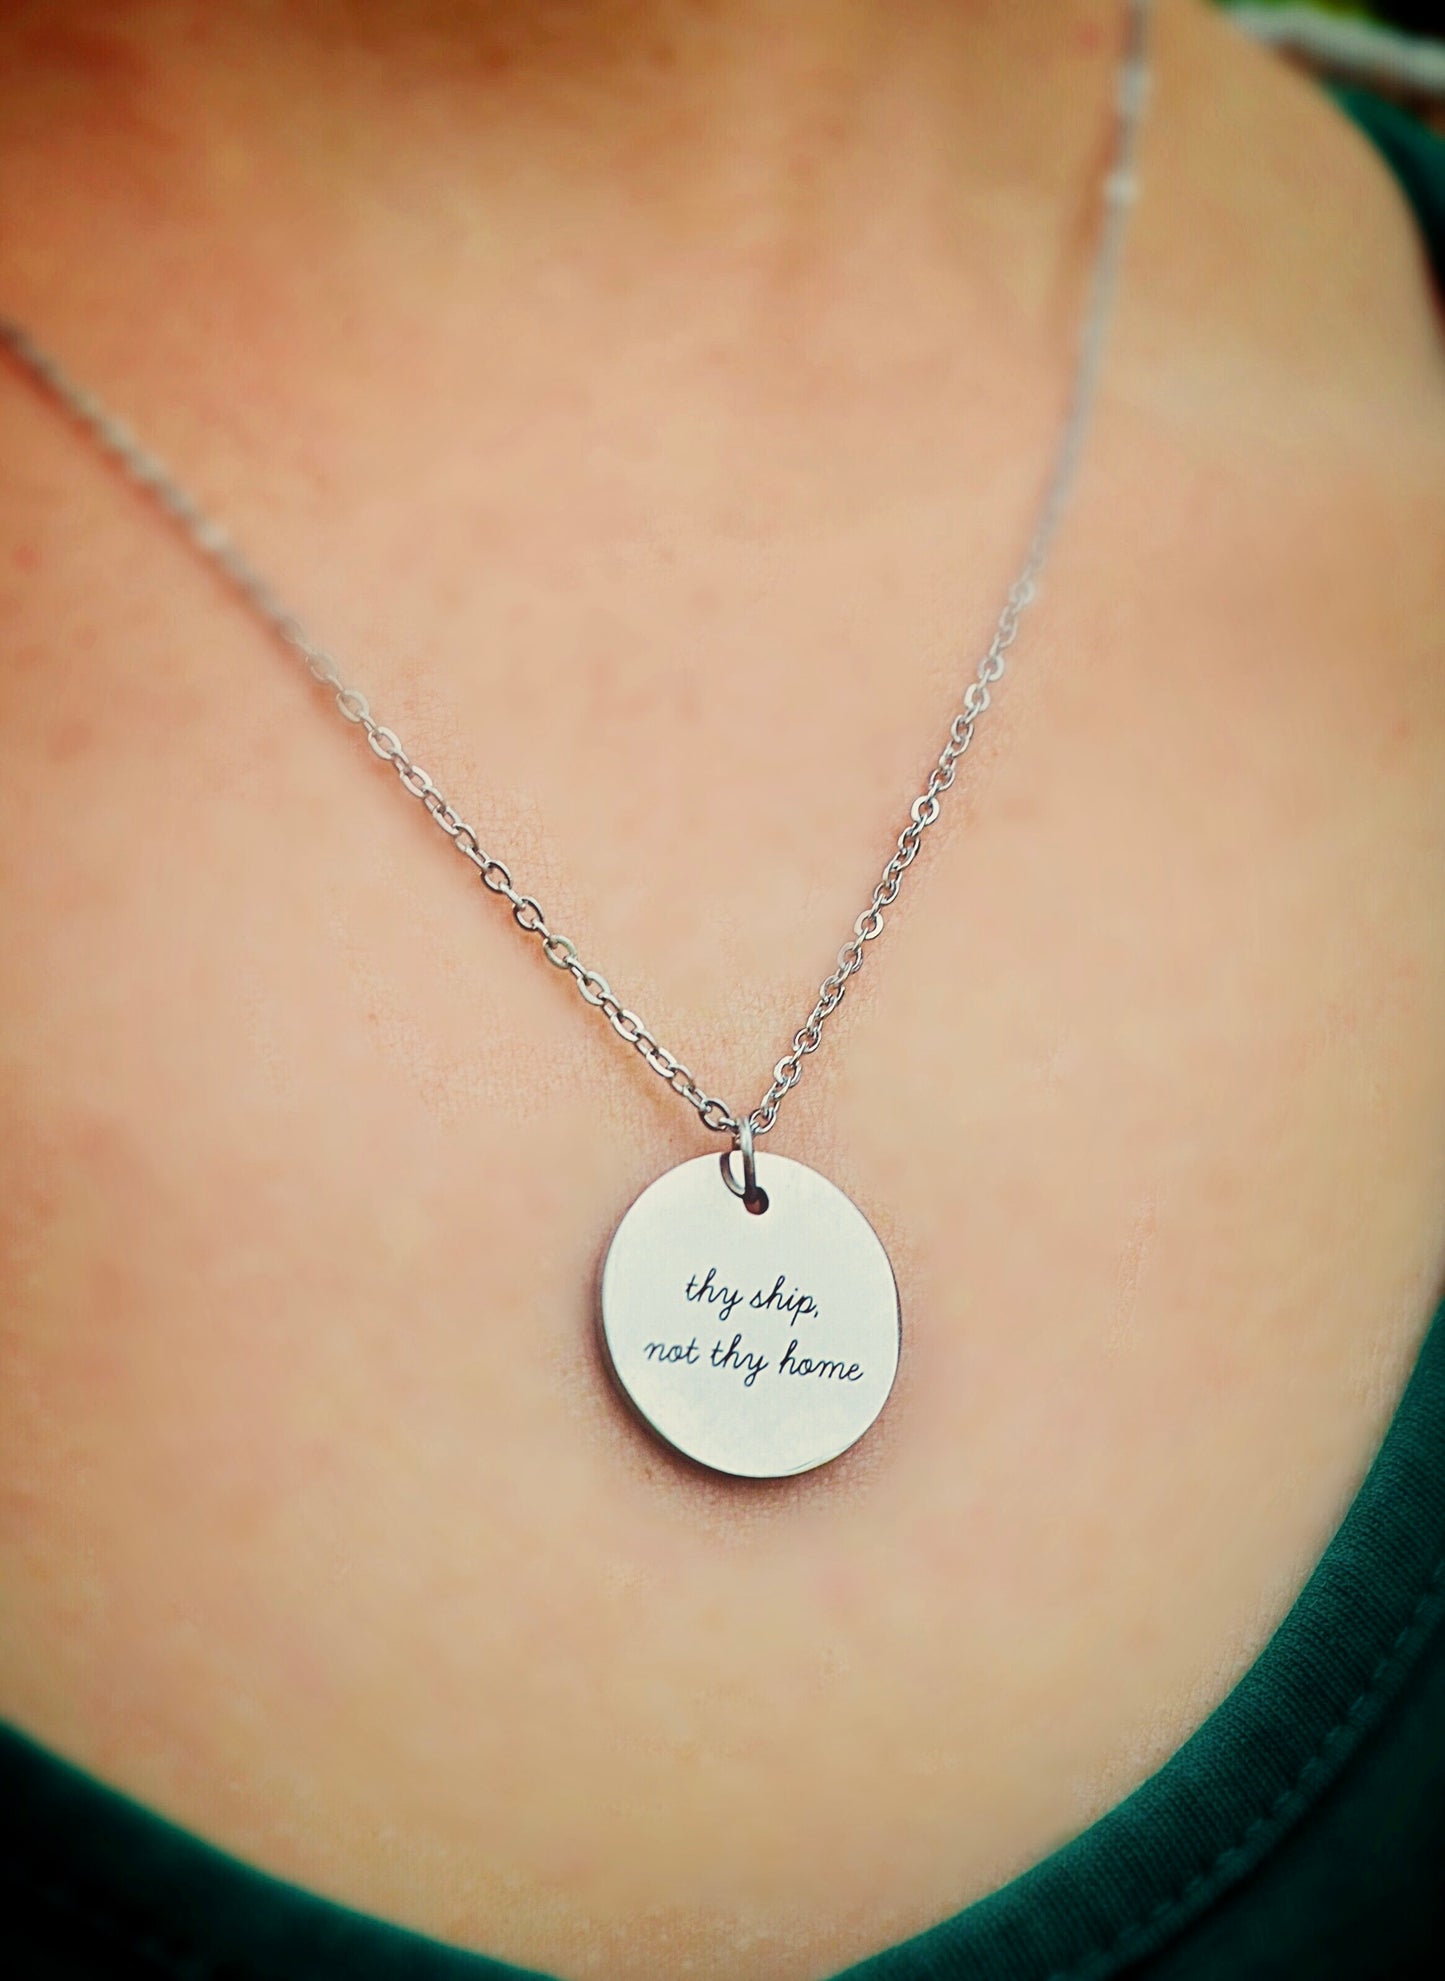 Miscarriage gift Necklace - Saint Therese of Lisieux quote